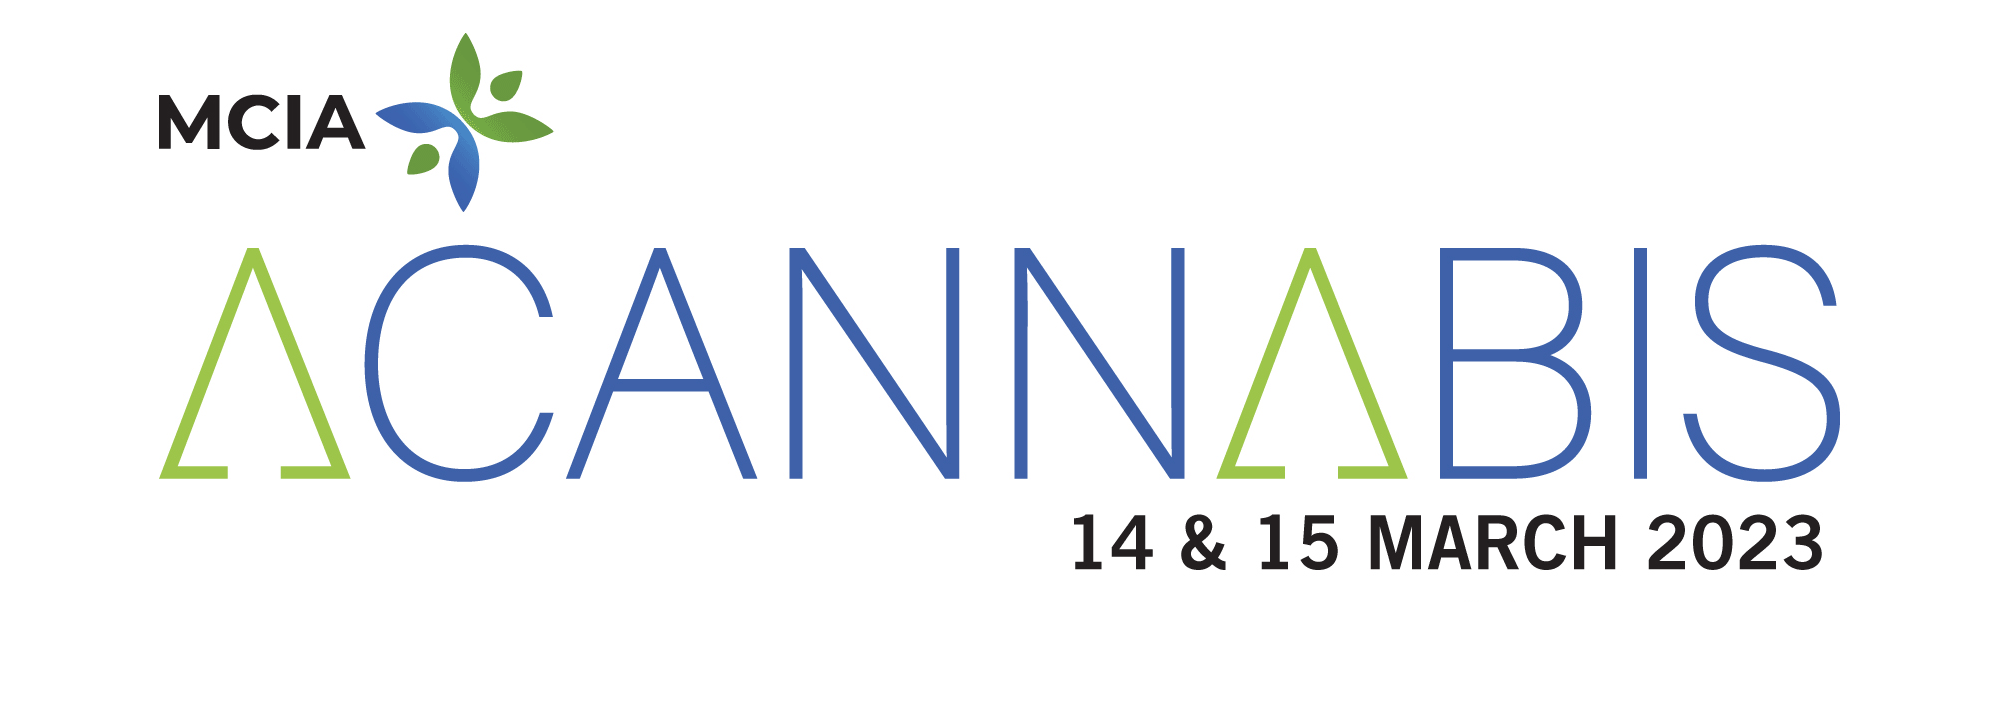 ACannabis 2023: Growing The Industry Through Research, Collaboration and Innovation.